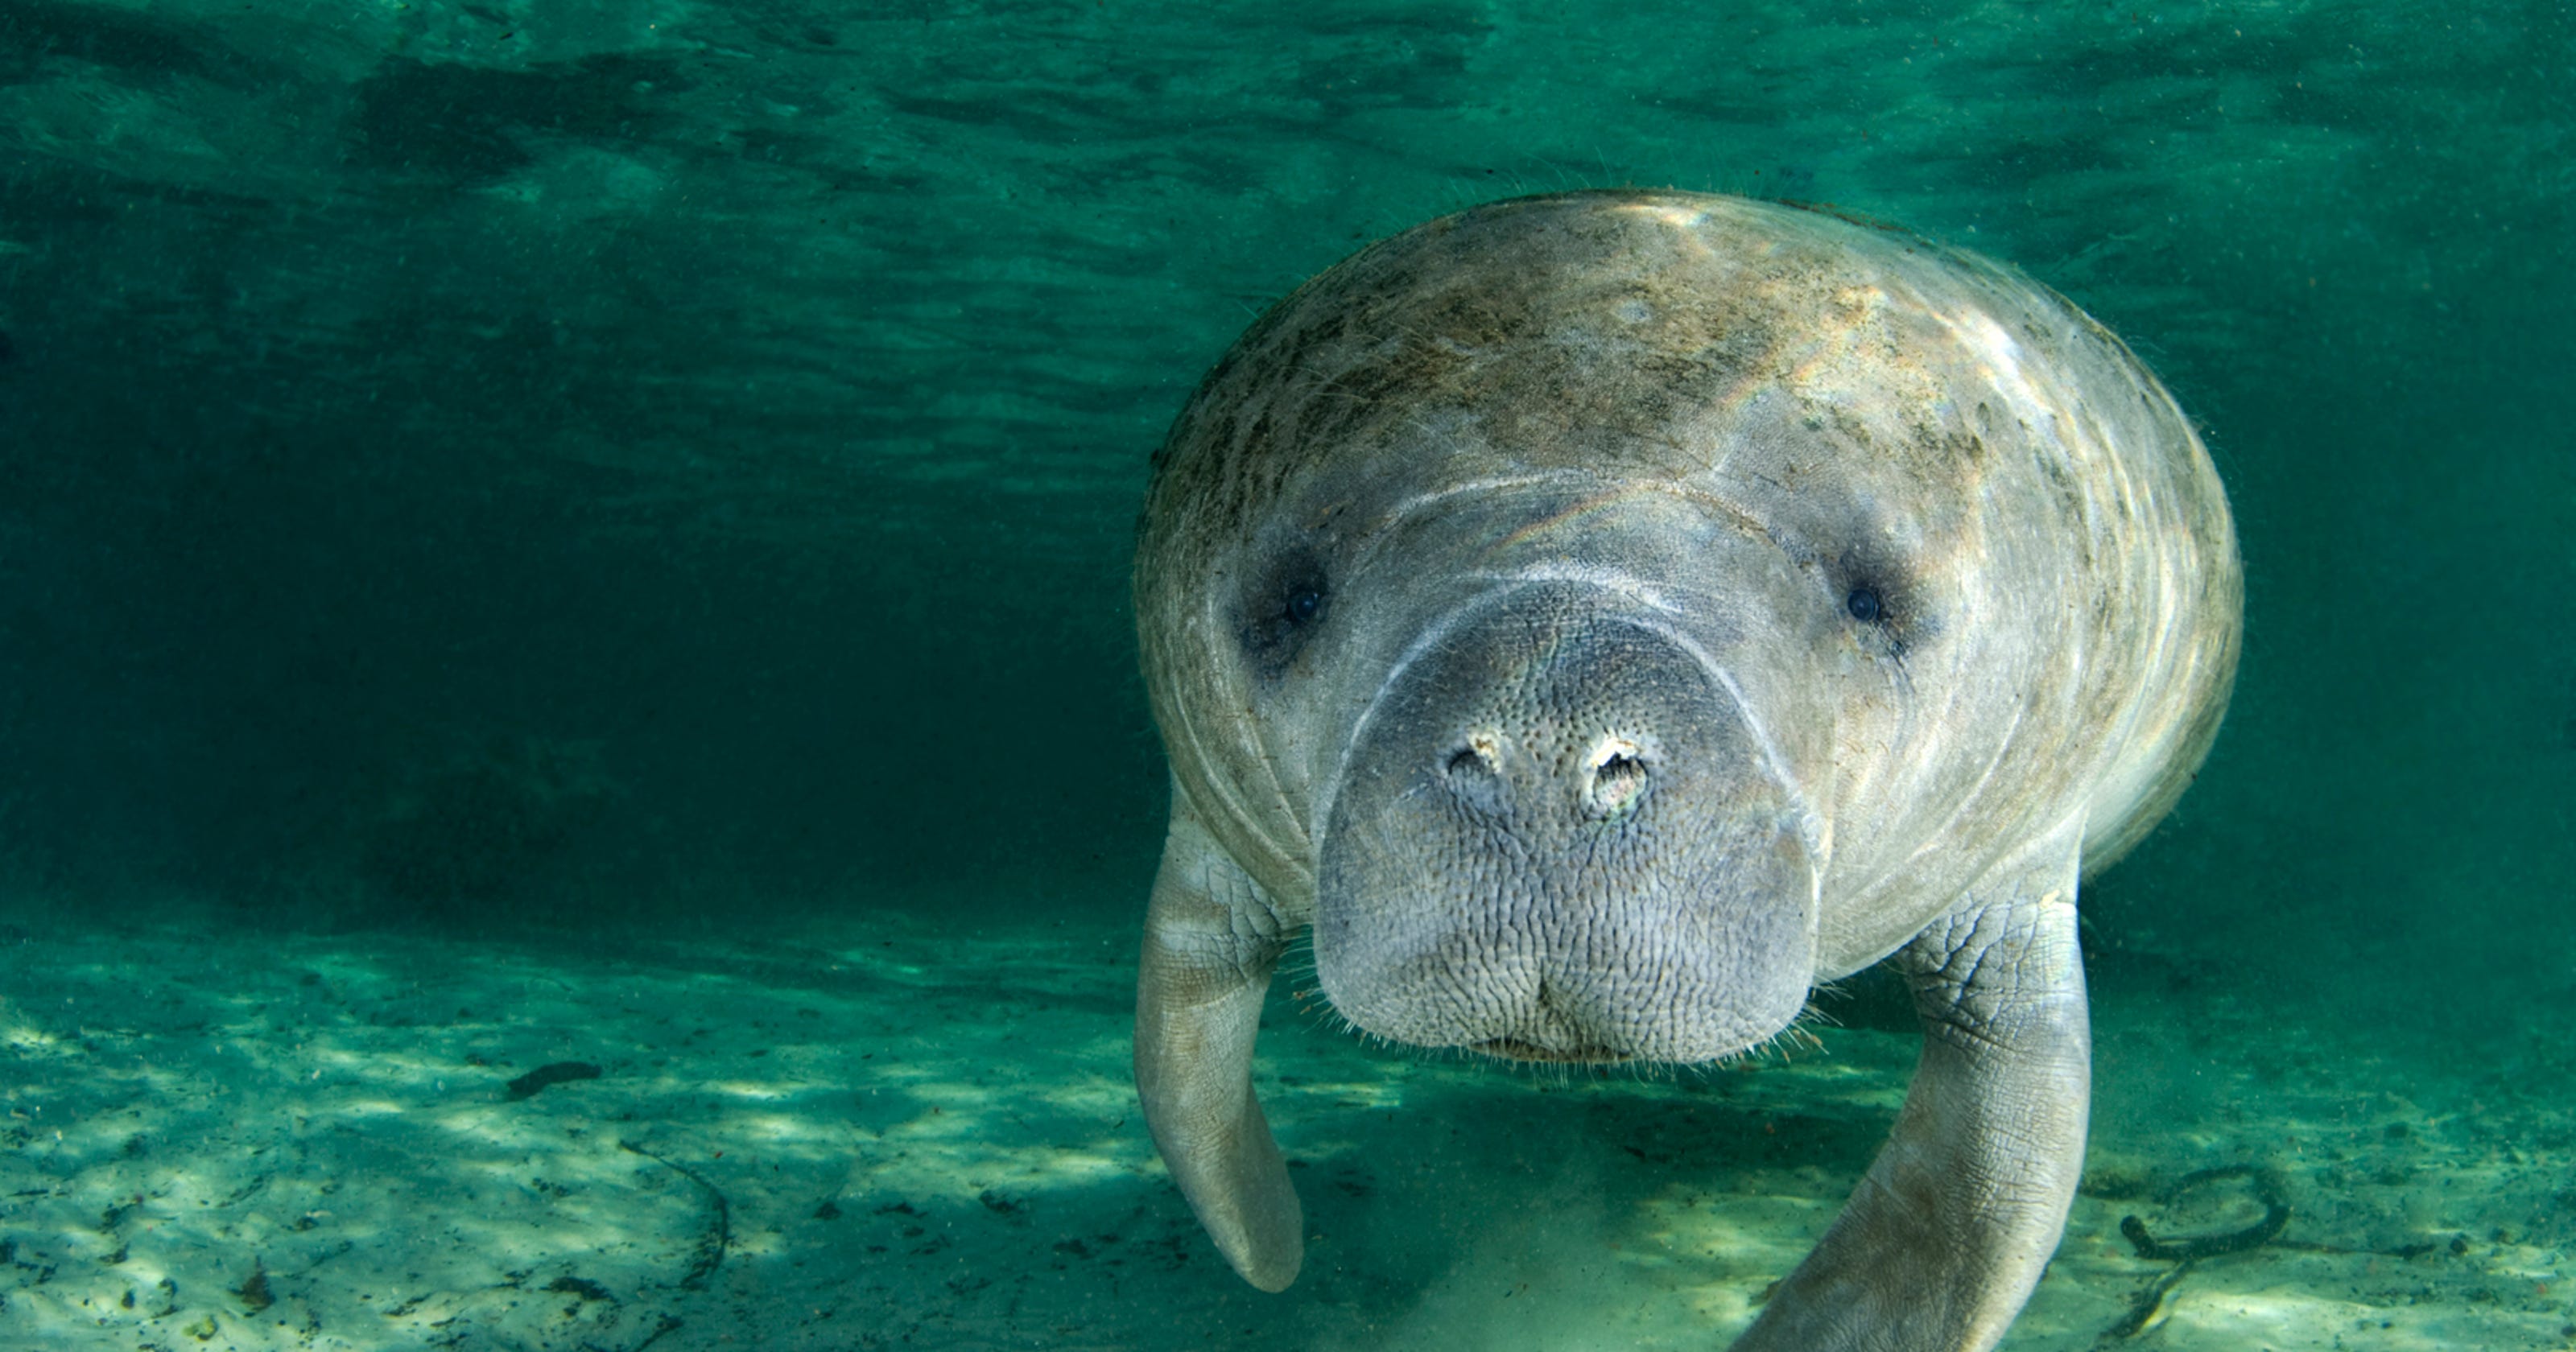 Manatee deaths from boat strikes on record pace in Florida in 2016